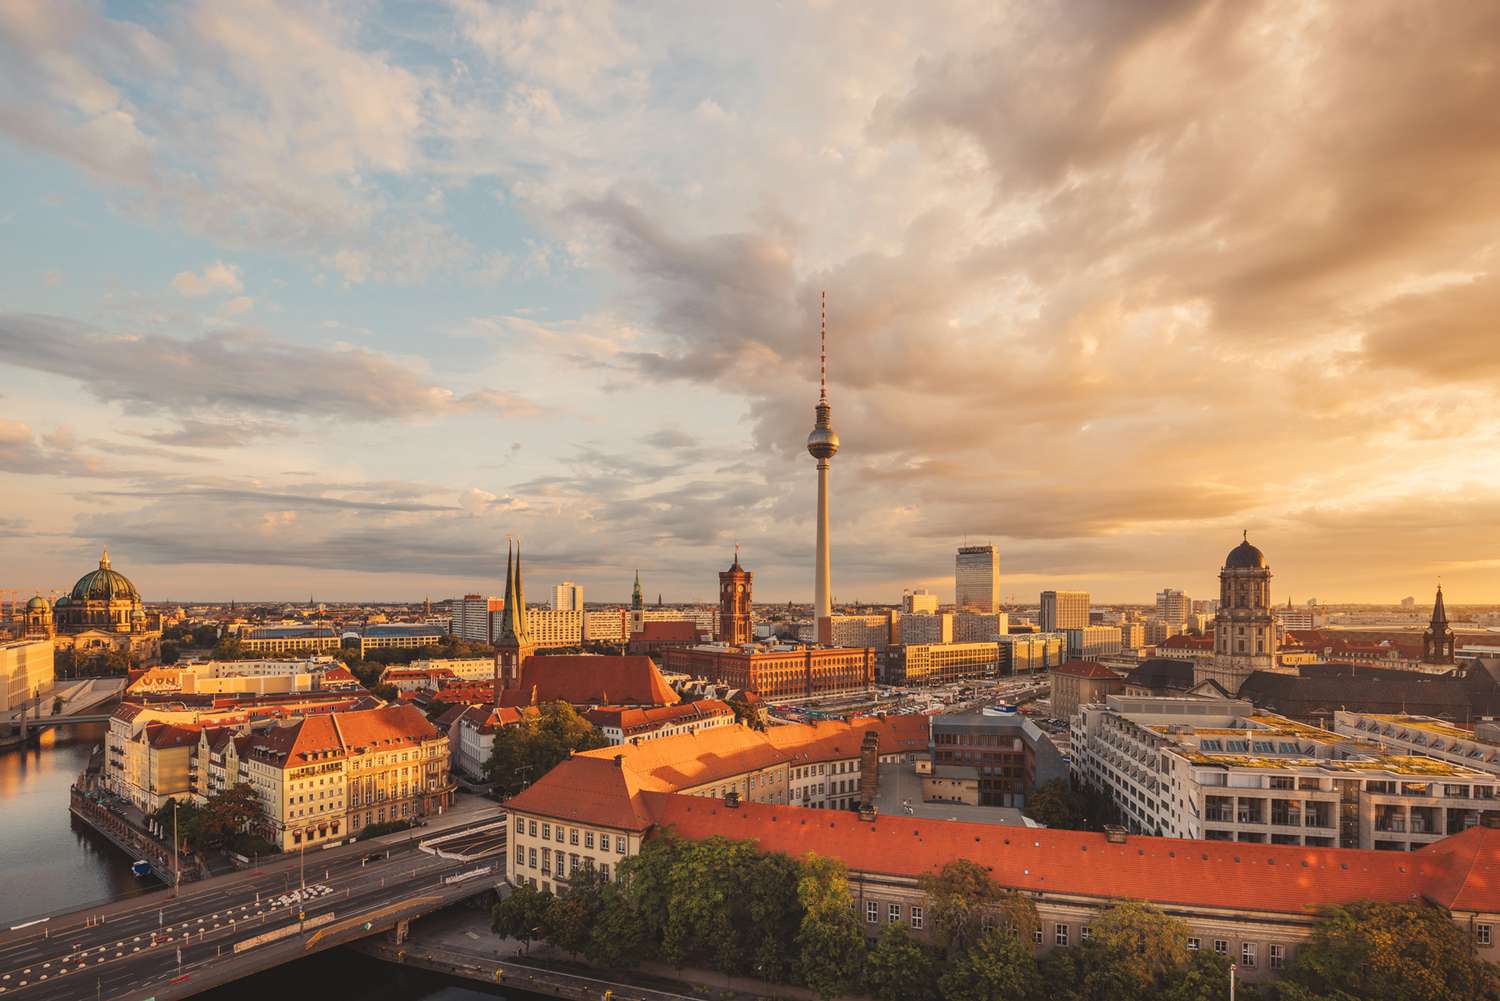 Berlin Quick Travel Guide – Top Things To See And Do In 4 Hours